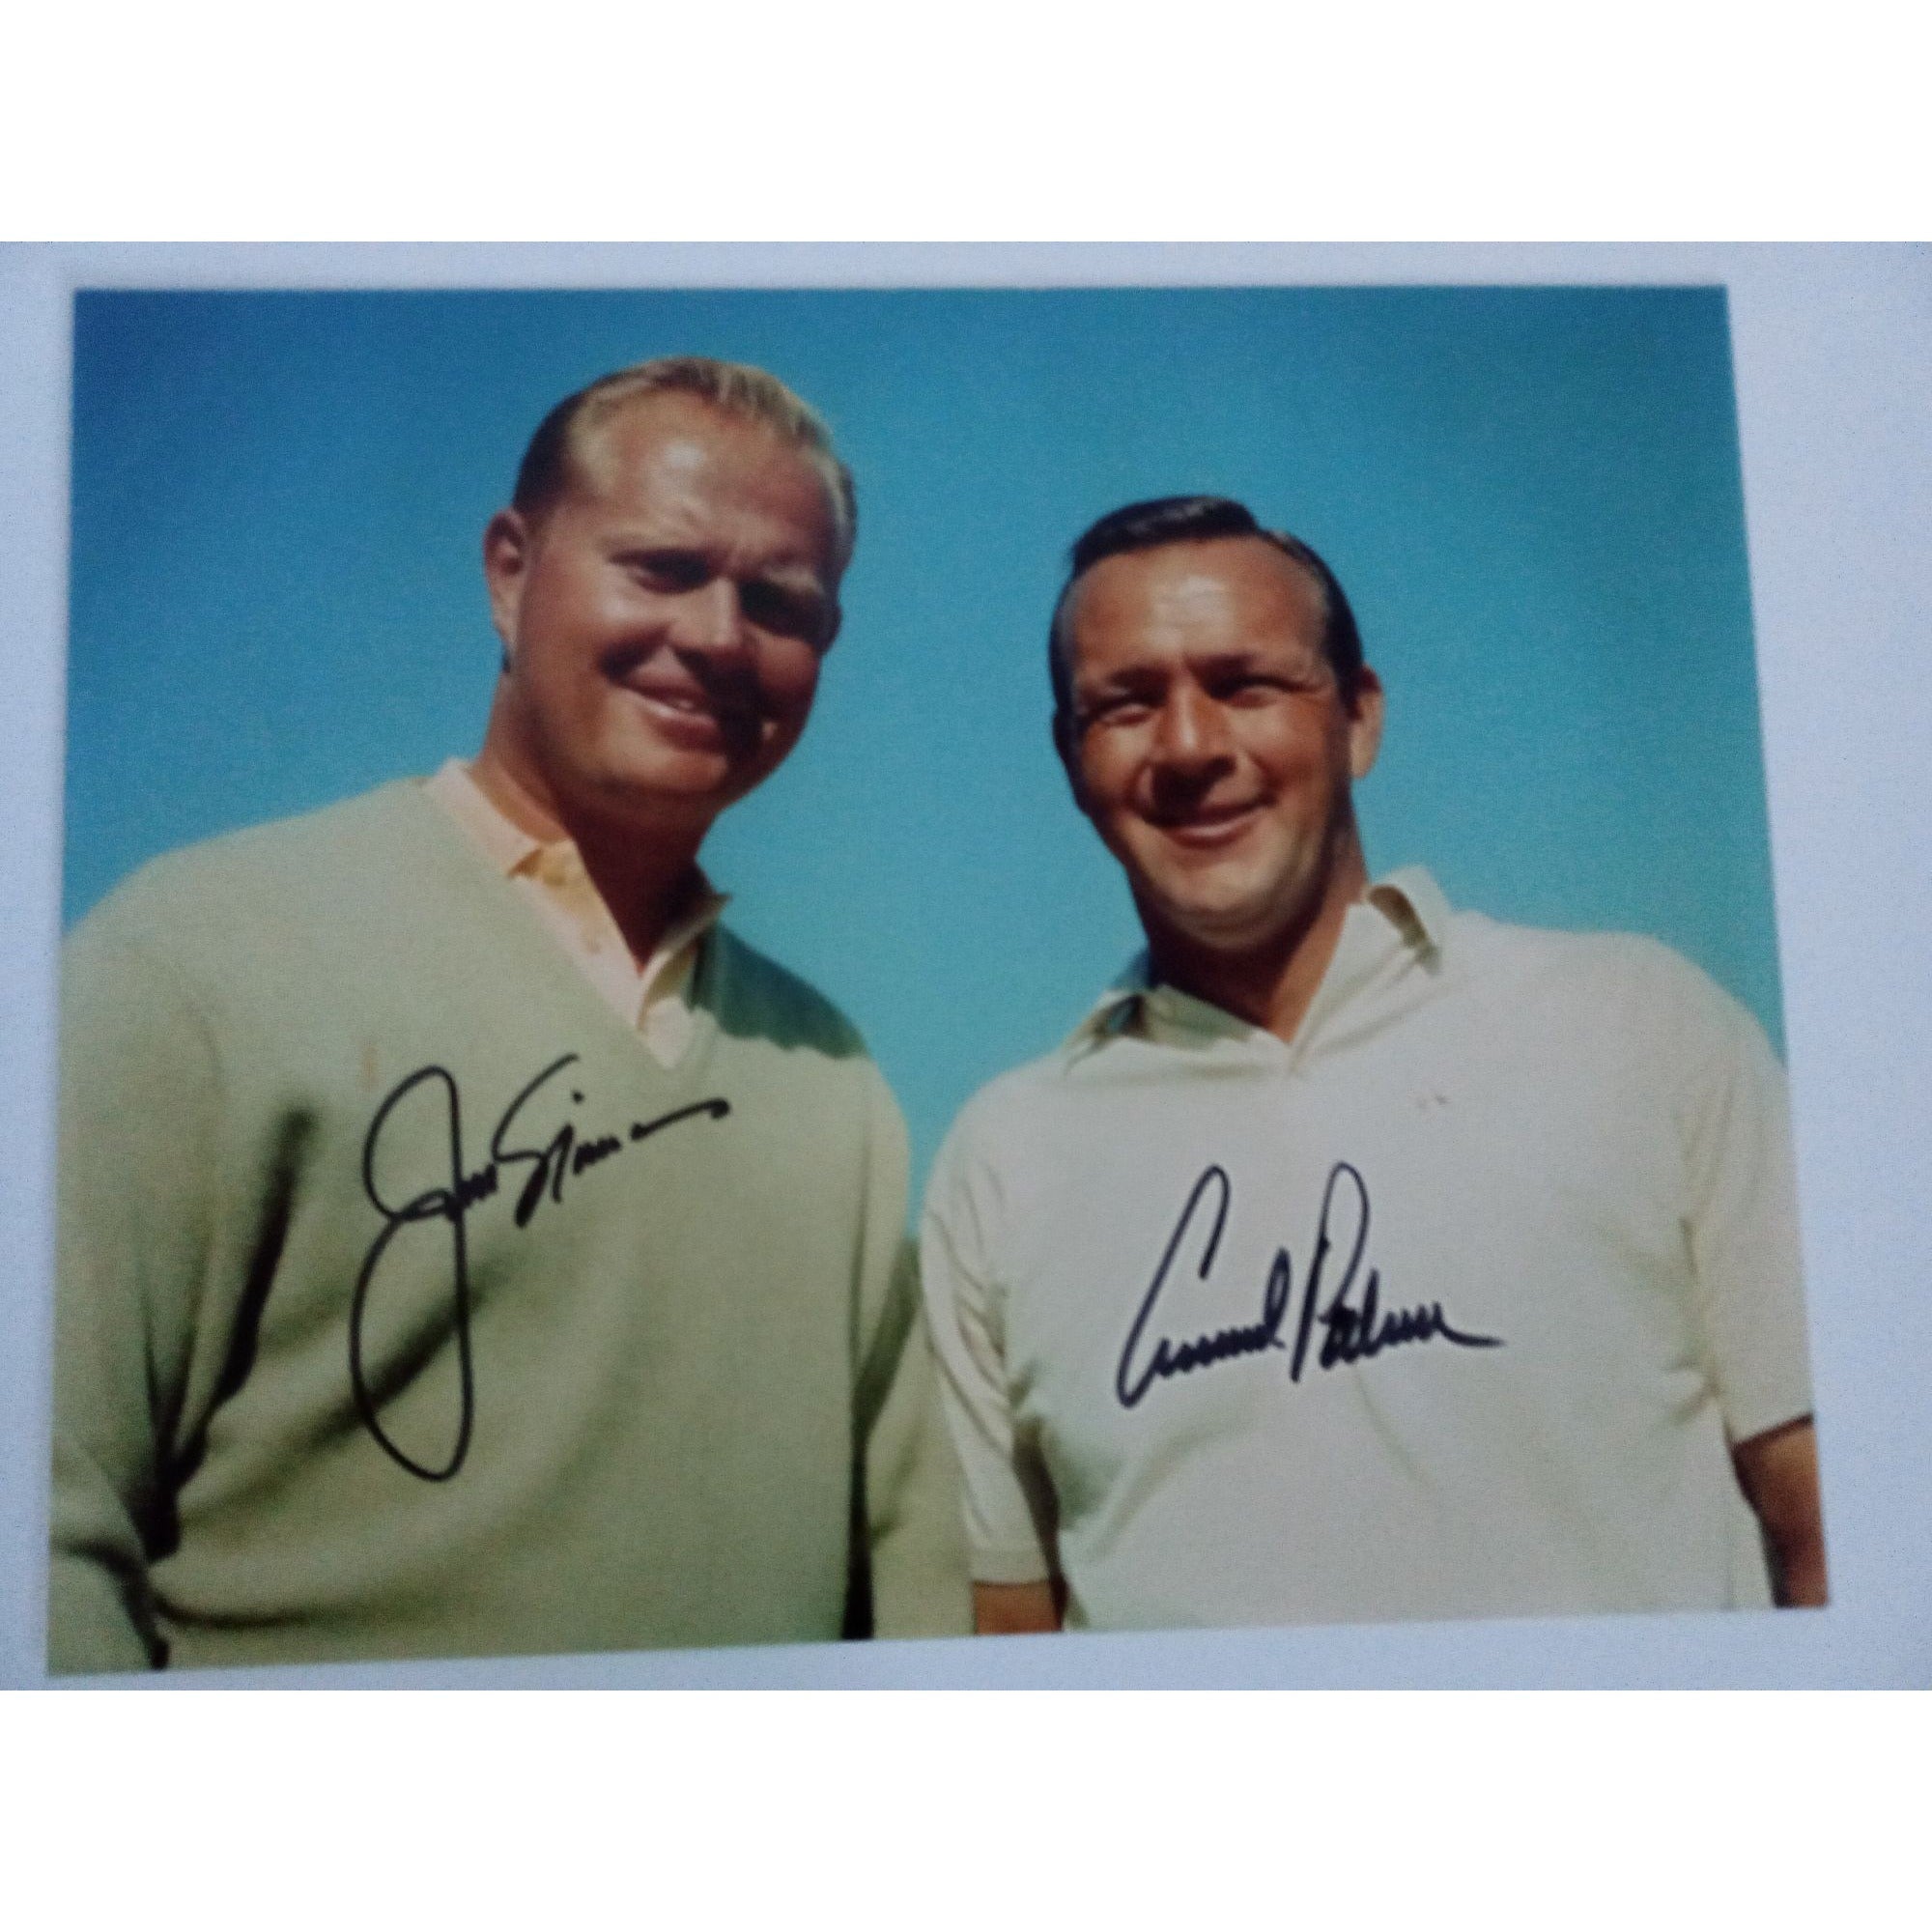 Jack Nicklaus and Arnold Palmer 8 by 10 signed with proof